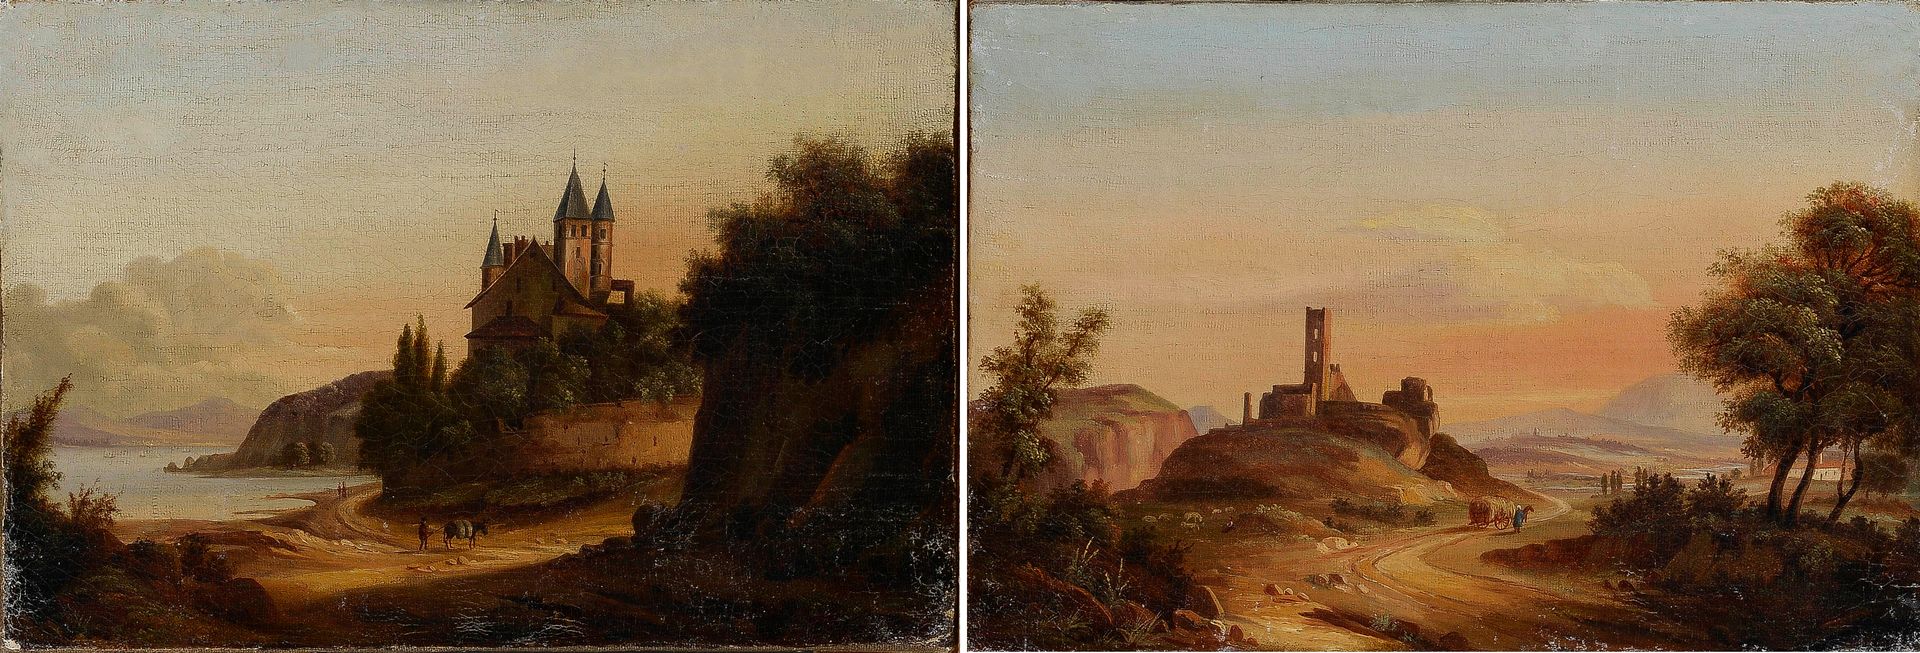 Null Pierre WÉRY (1770-1827)

Romantic landscapes

Pair of oil paintings on canv&hellip;